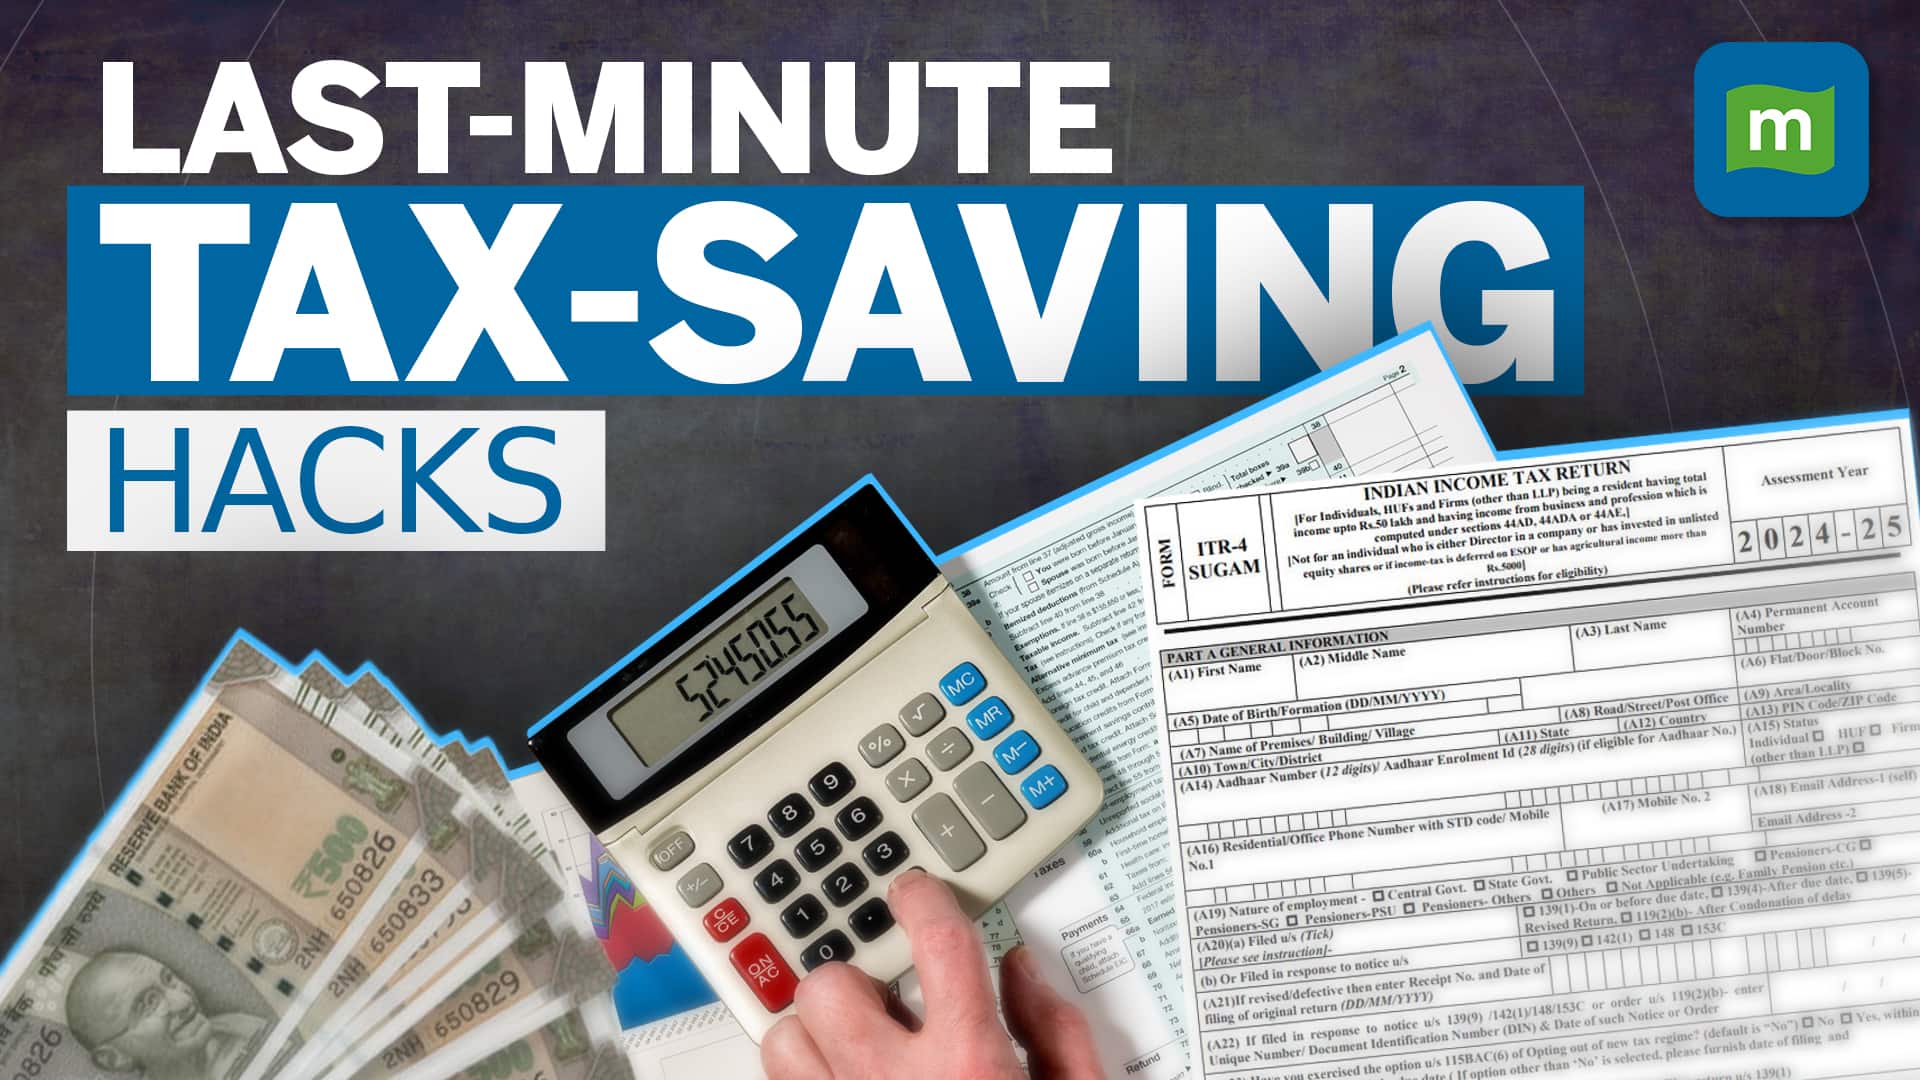 Last-minute tax saving for FY2023-24: Do’s and don’ts for tax planning in March